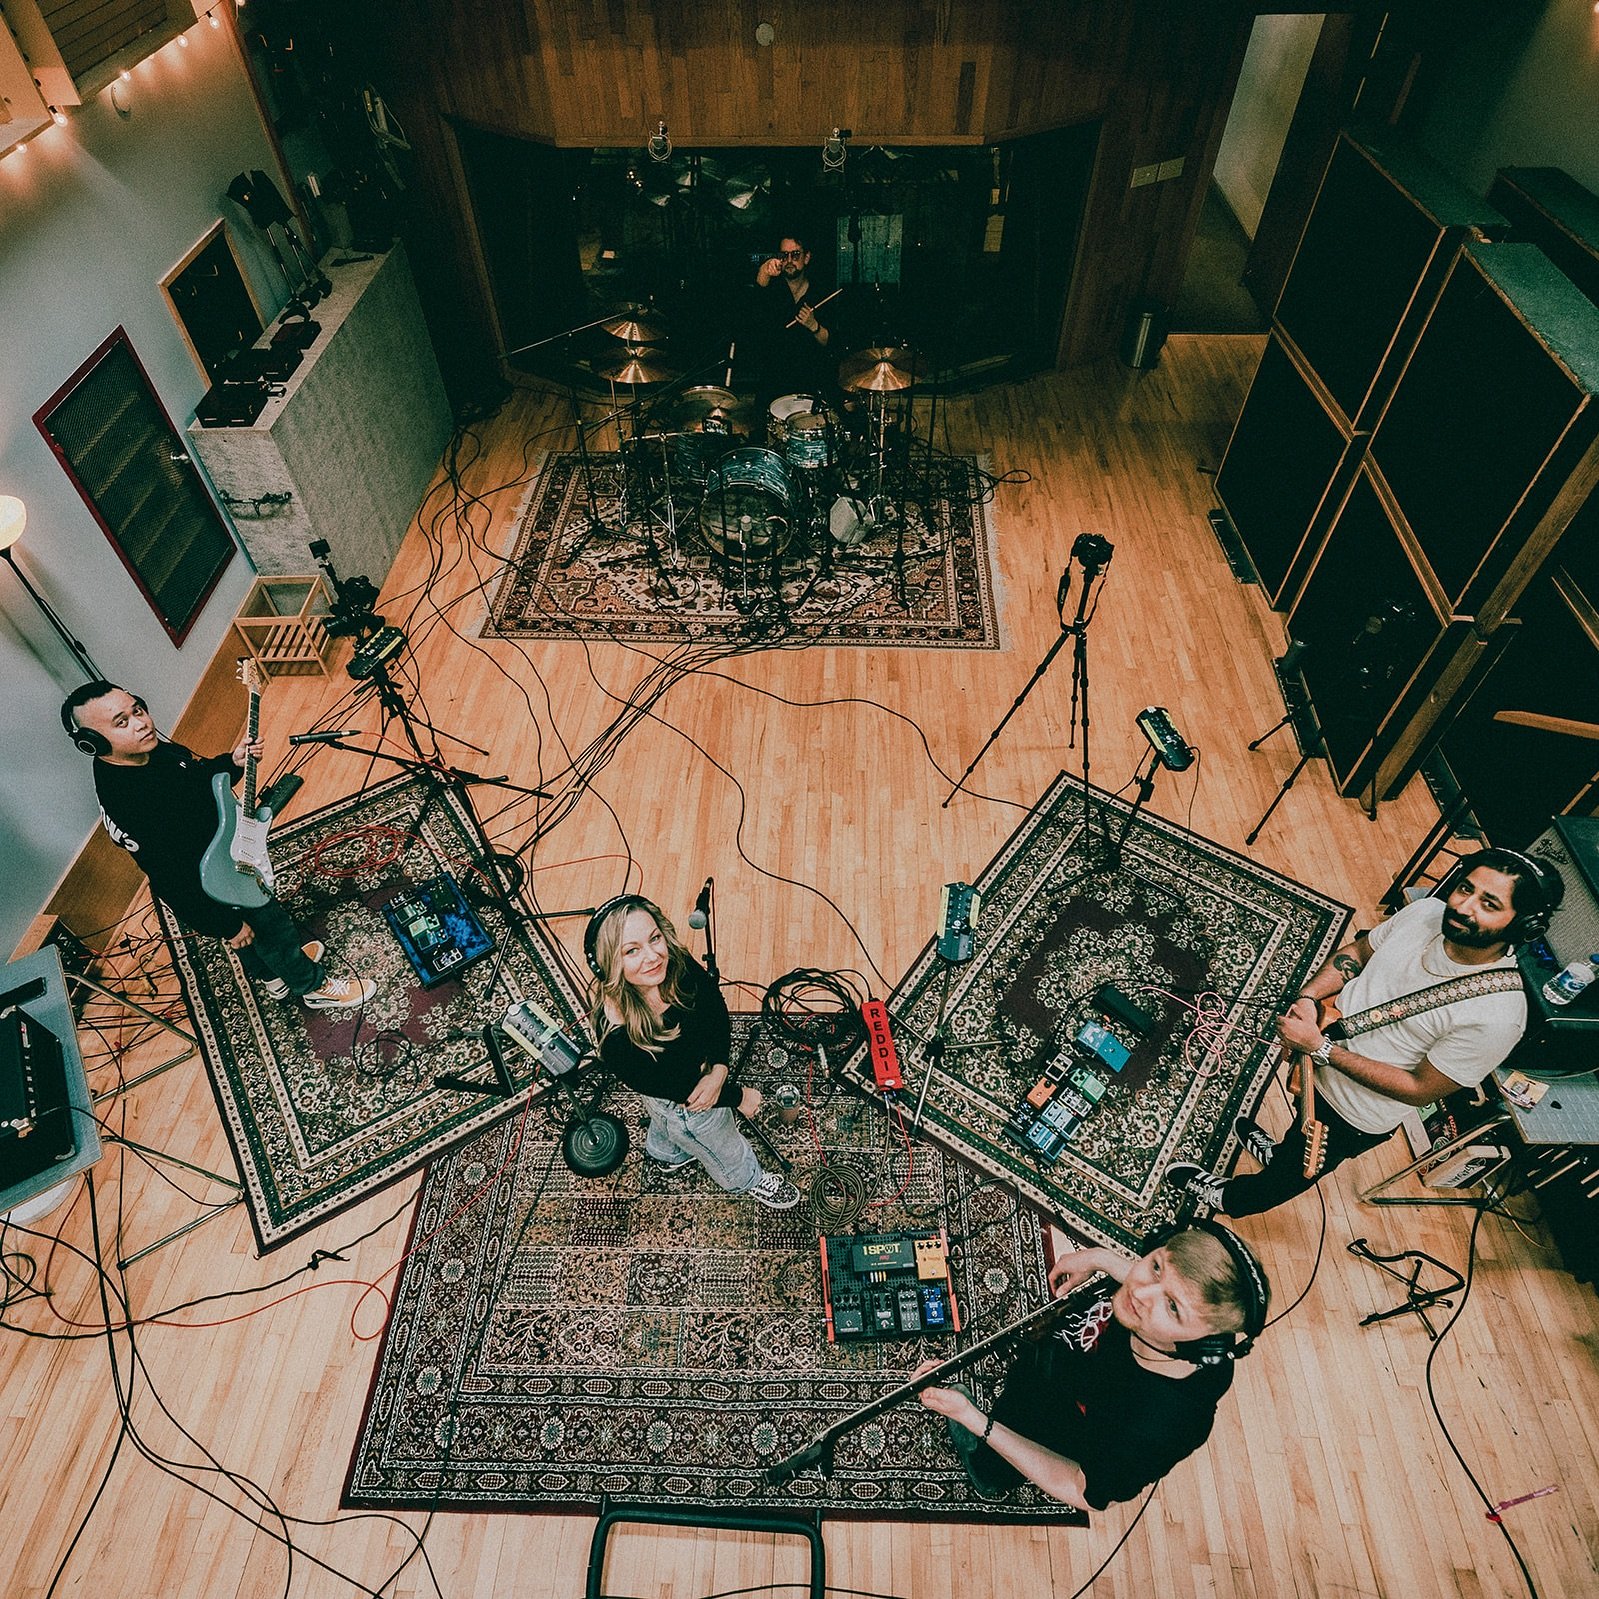 It&rsquo;s official&hellip; LIVE OFF THE FLOOR album is OUT NOW! We had so much fun working on this&hellip; Just the five of us and @emily_ryan  recording live in the studio with zero pressure. 💜 link in bio, let us know what ya think! ✌️✨

Huge tha